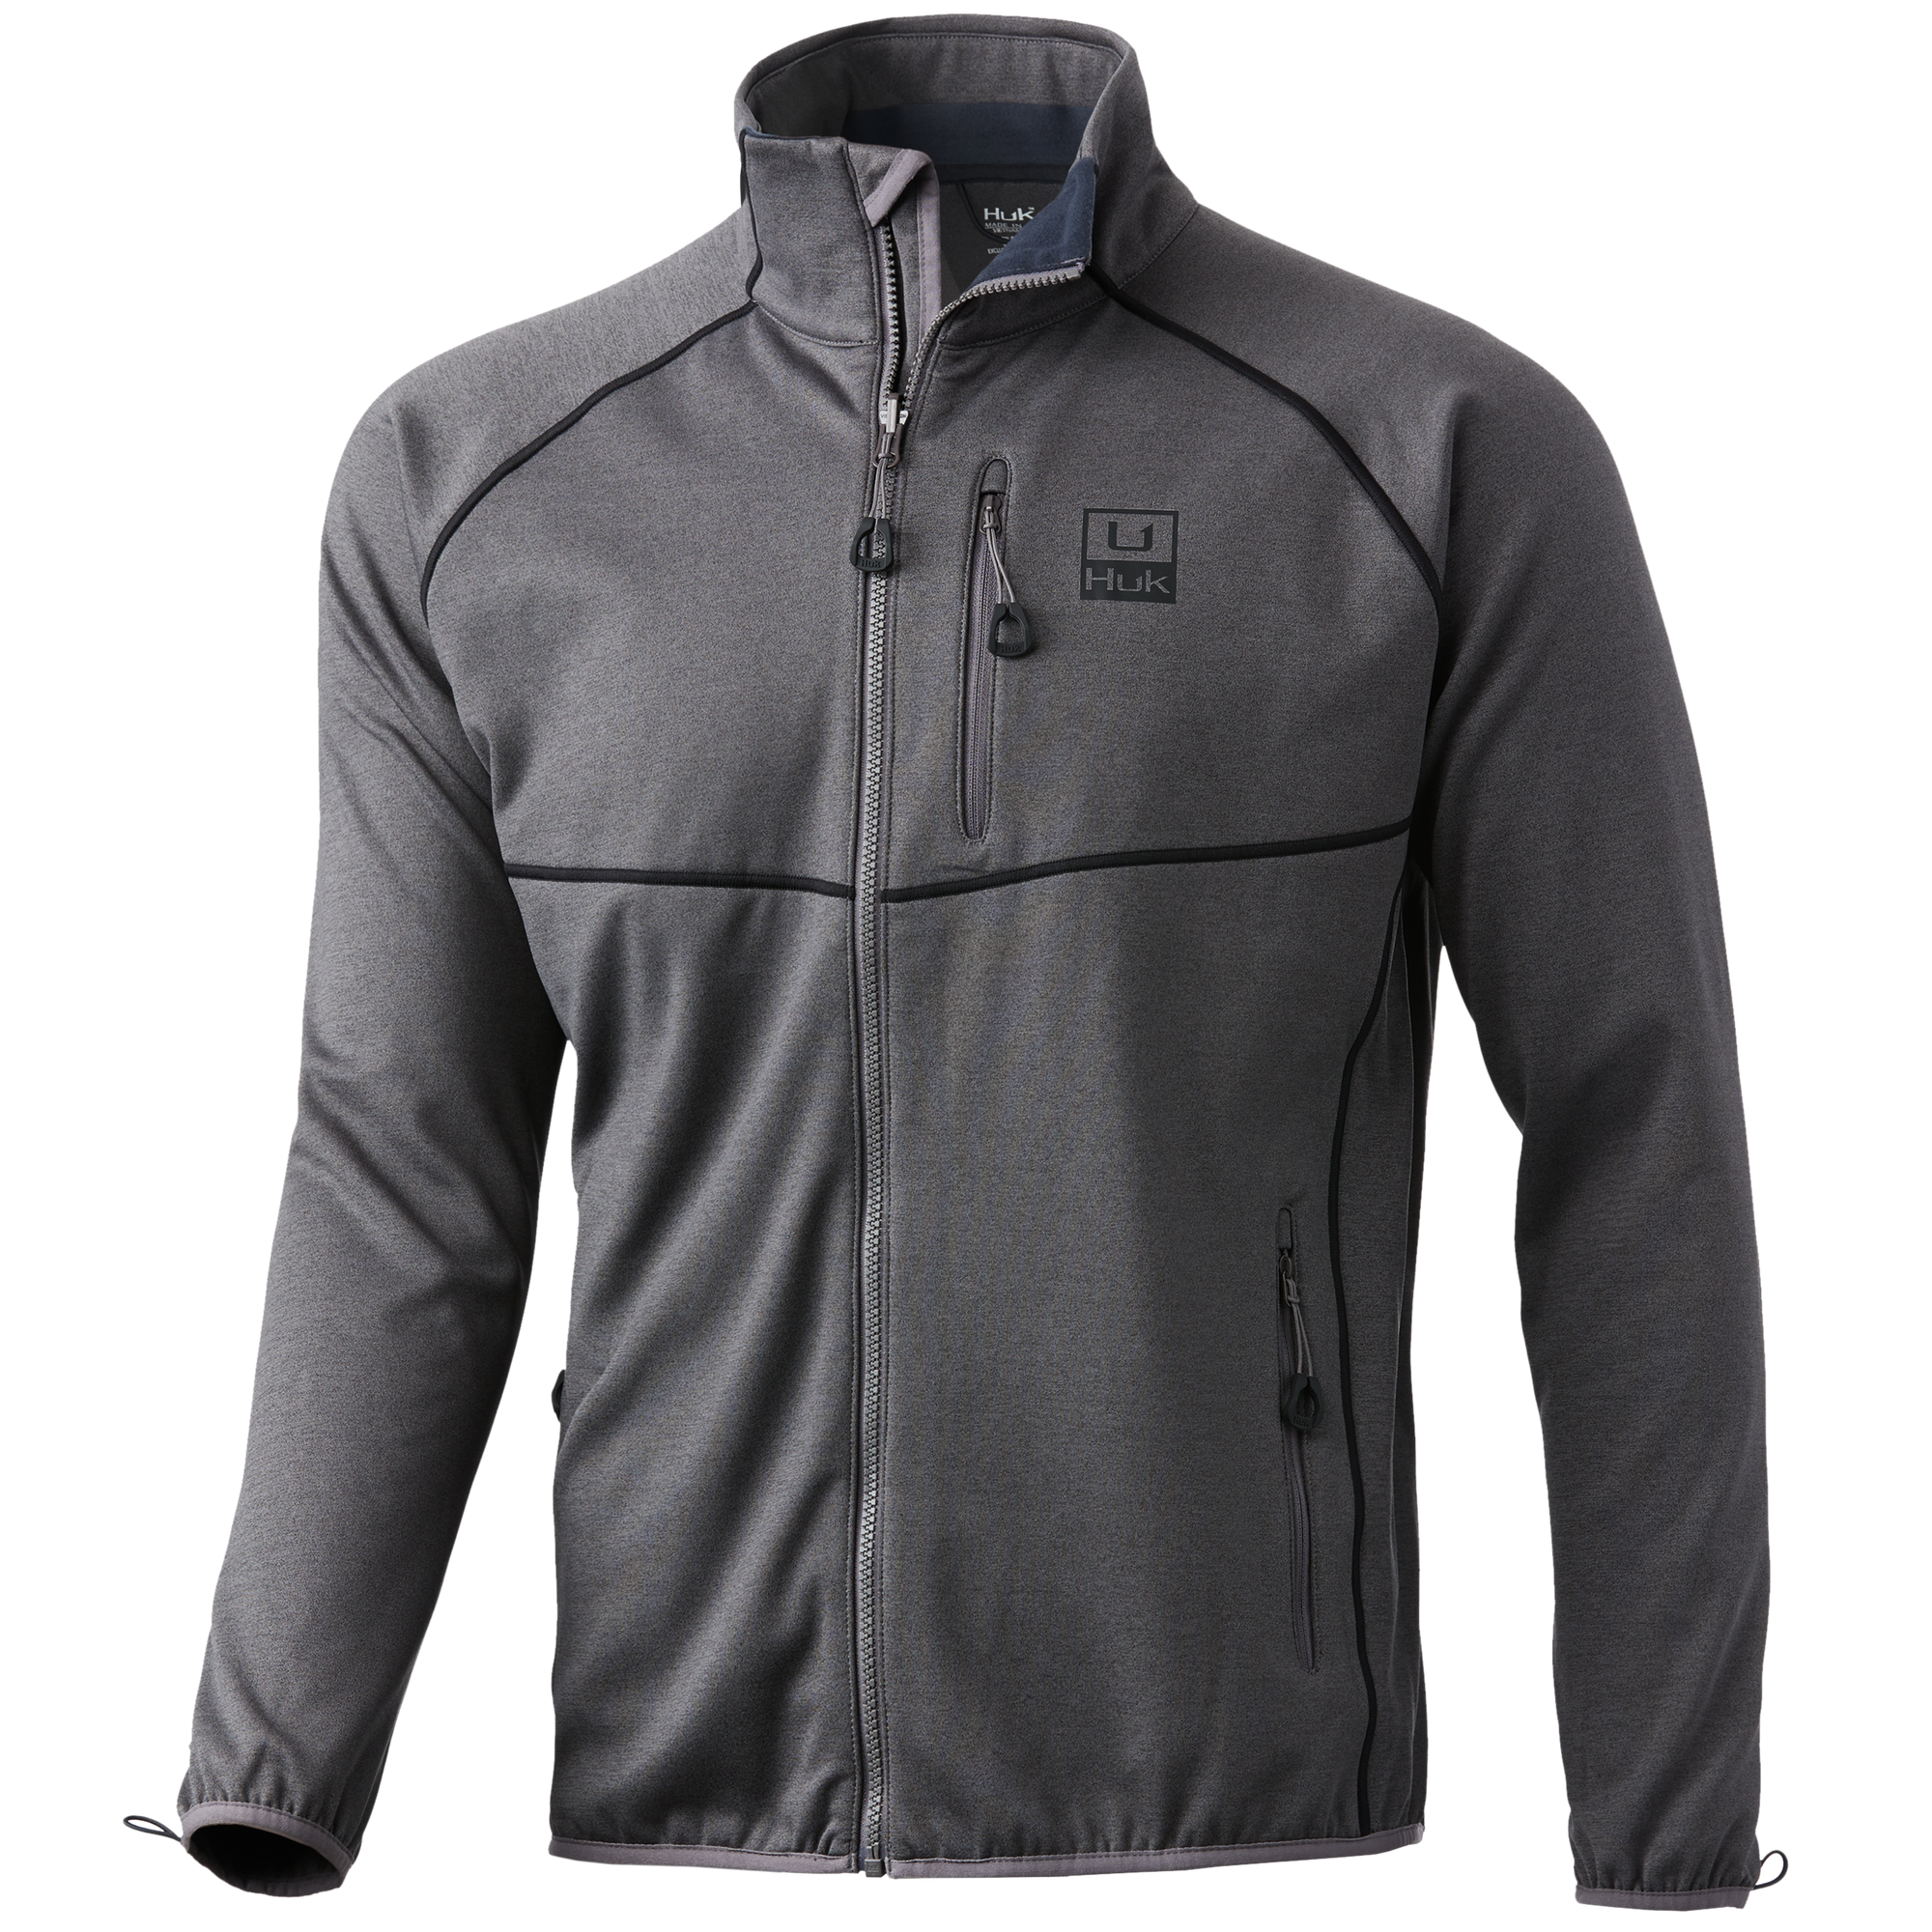 <p><strong>Huk Fin Jacket</strong><br> Those chilly runs across the lake in the fall can be no fun, but with a comfortable perfomance fleece like the Huk Fin Jacket, those runs will be a breeze. A water and wind resistant design makes the Fin Jacket the perfect solution for fall fishing. Although the Fin Jacket serves a purpose on the water, it's also the perfect casual jacket to wear to the tailgate of the upcoming game. <a href=